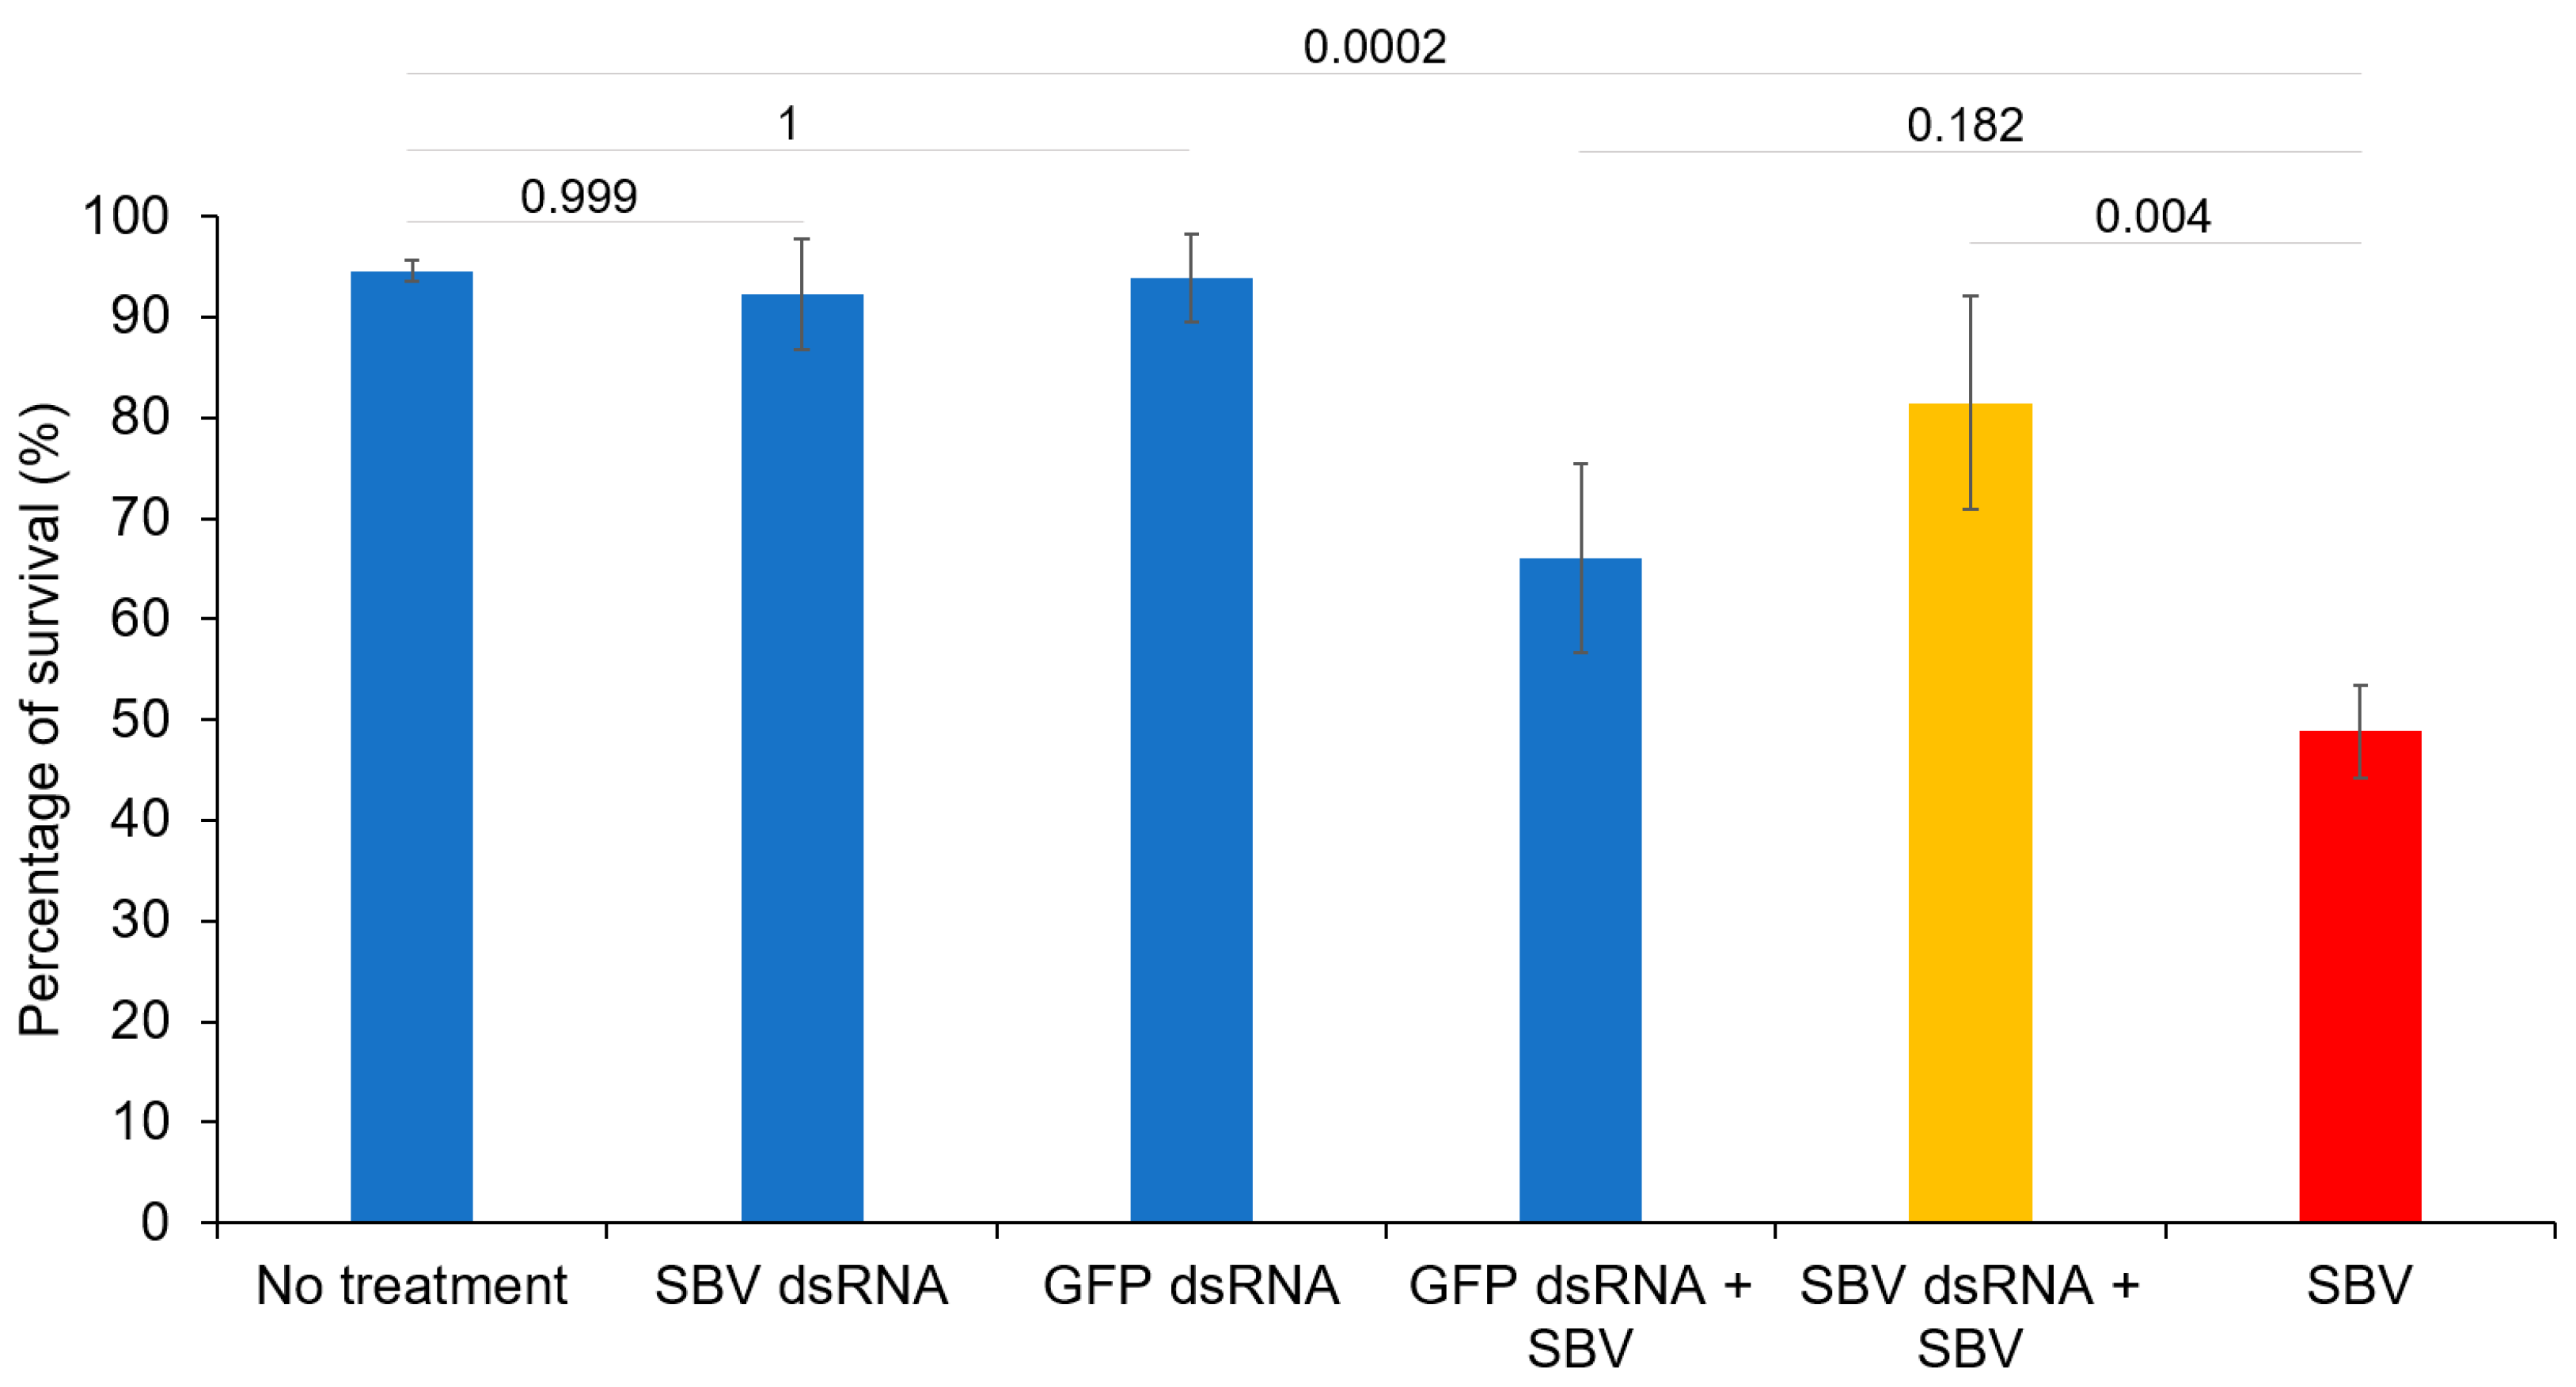 Viruses | Free Full-Text | Large-Scale Application of Double-Stranded RNA  Shows Potential for Reduction of Sacbrood Virus Disease in Apis cerana  Apiaries